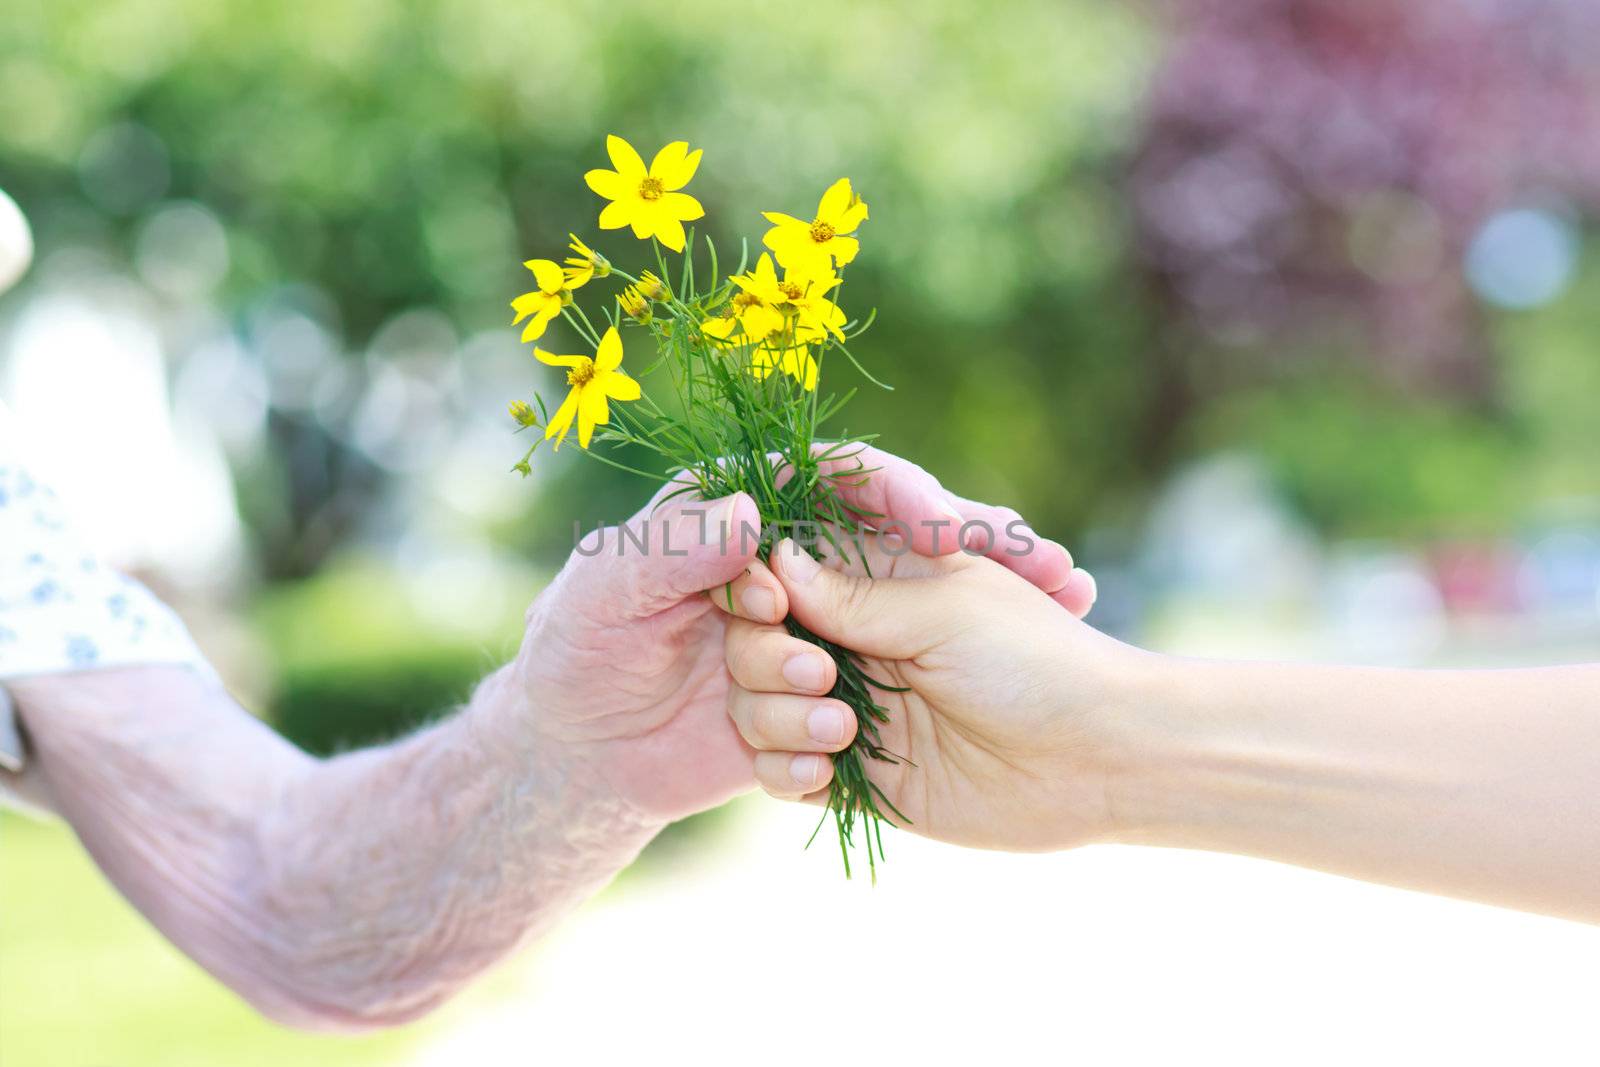 Giving yellow flowers to senior lady outside